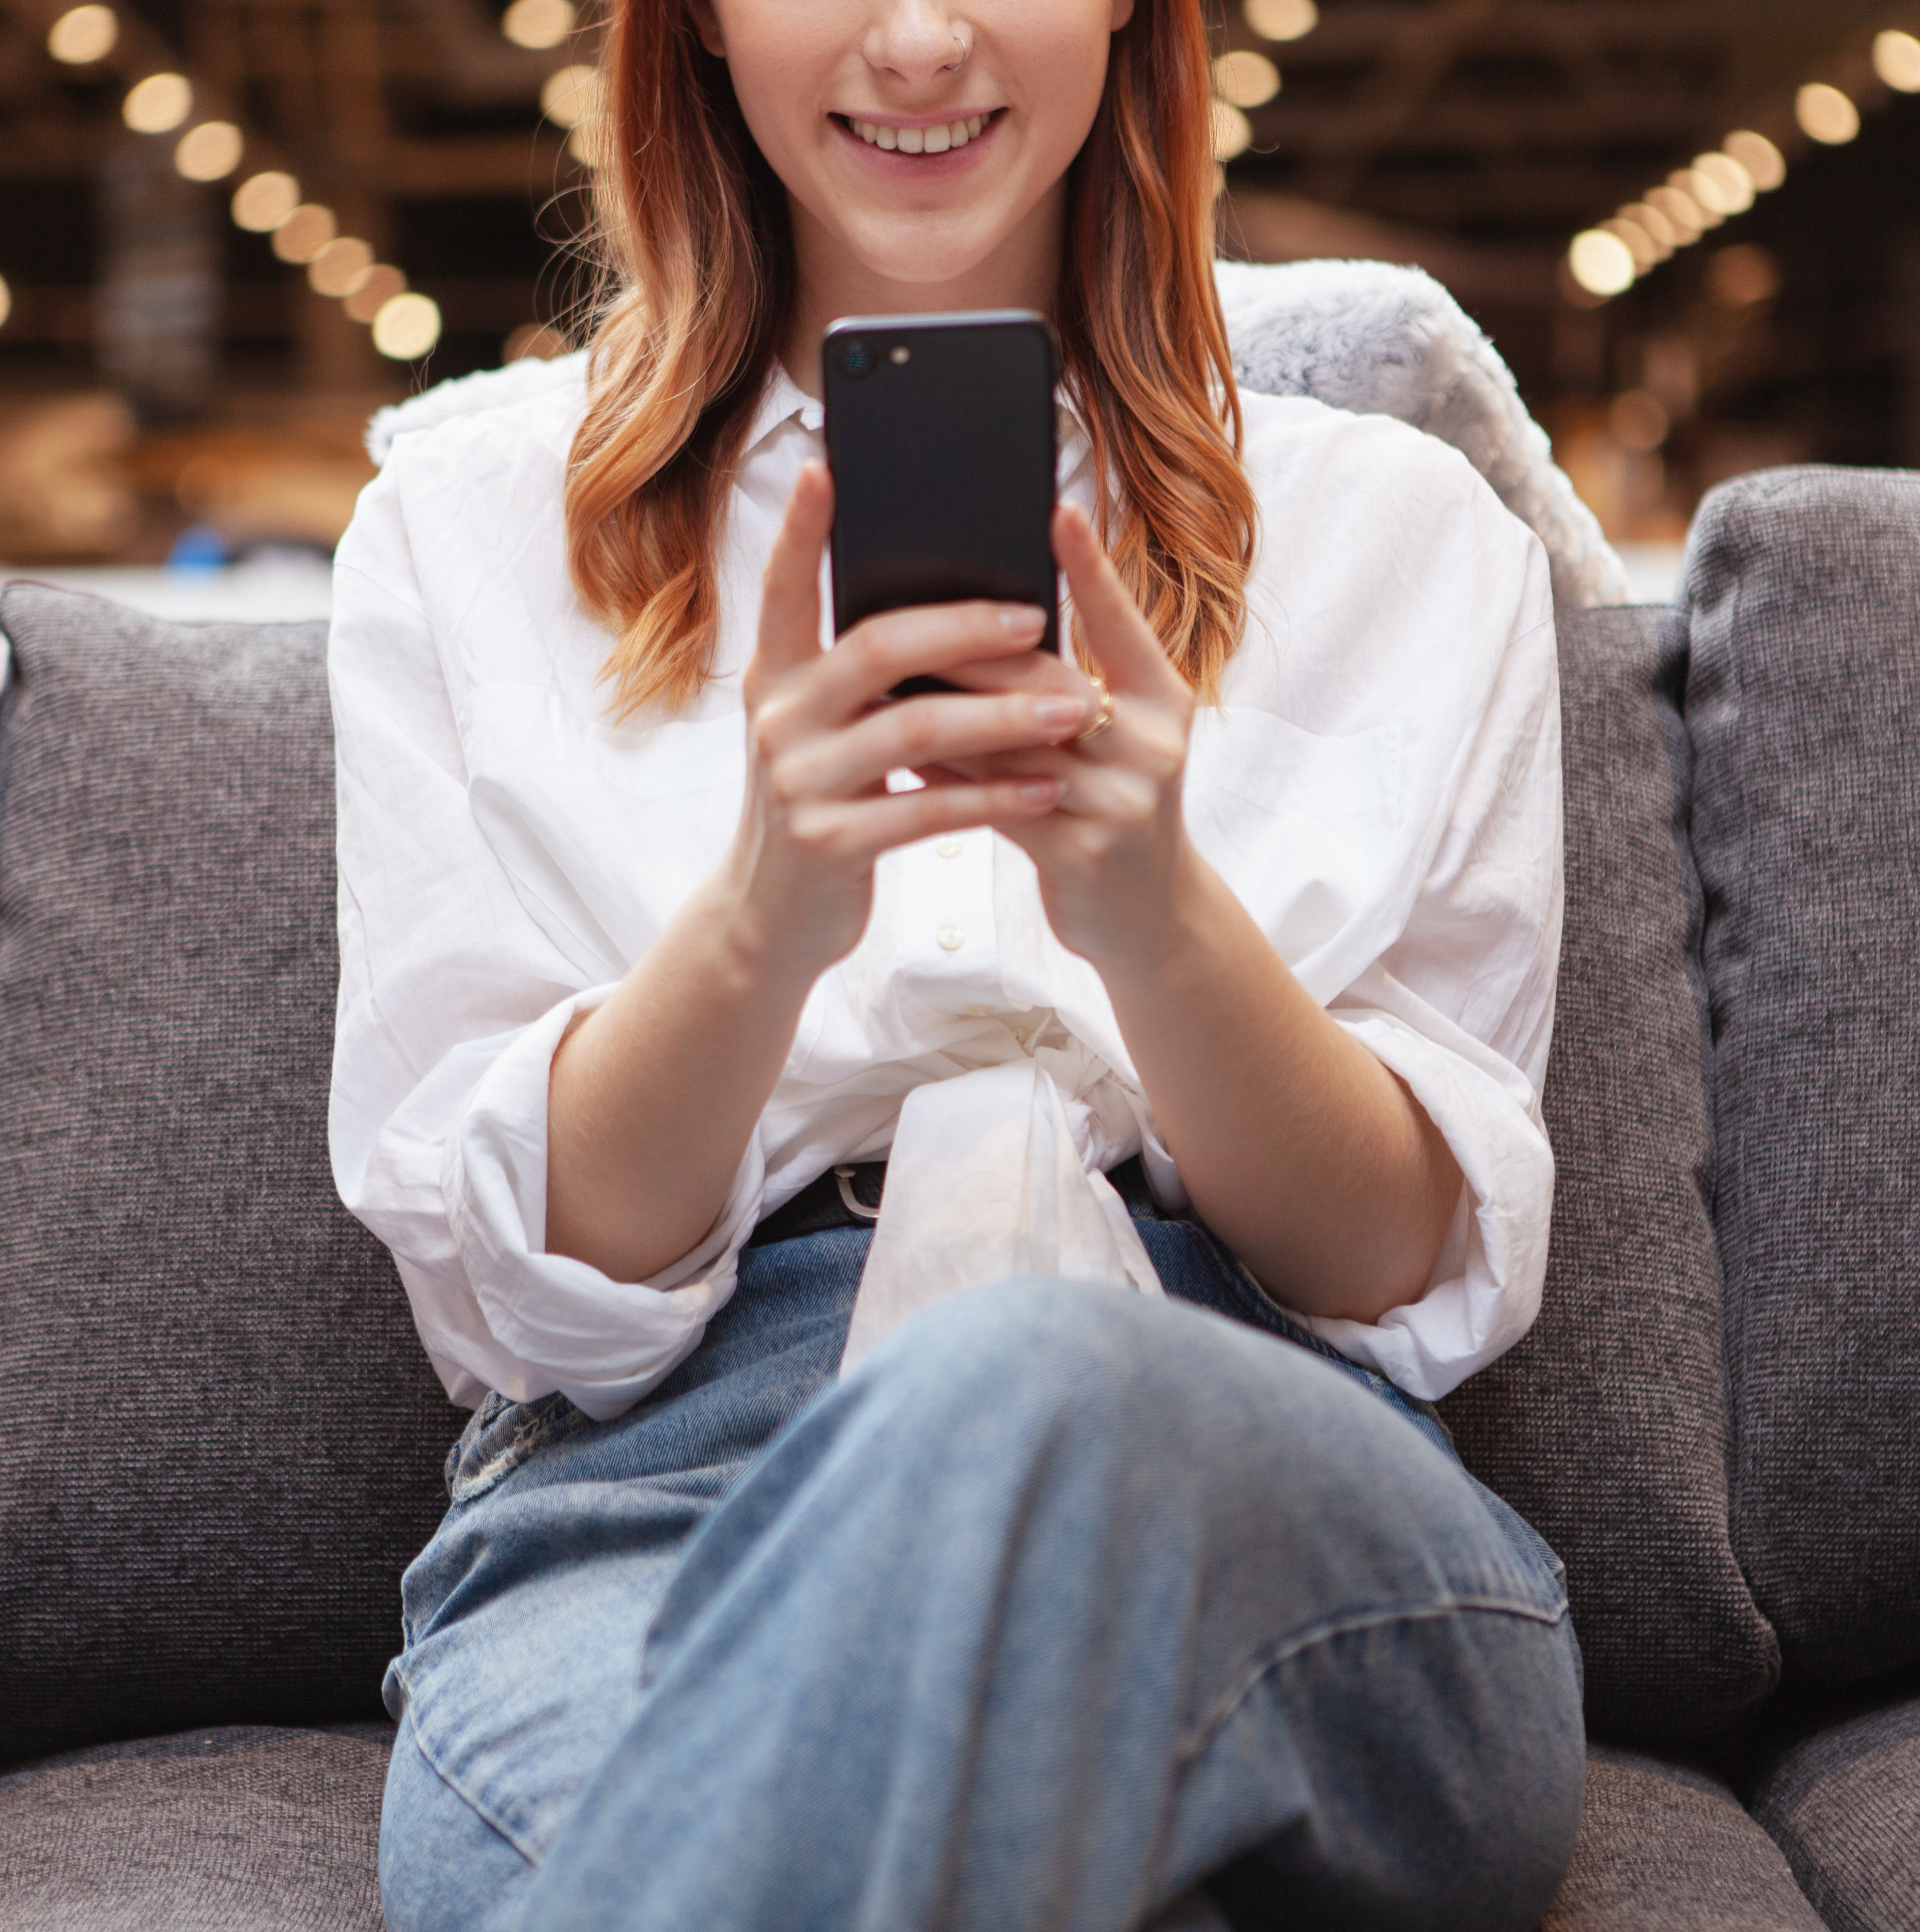 Cropped shot of a woman smiling, using smart phone while resting on a sofa